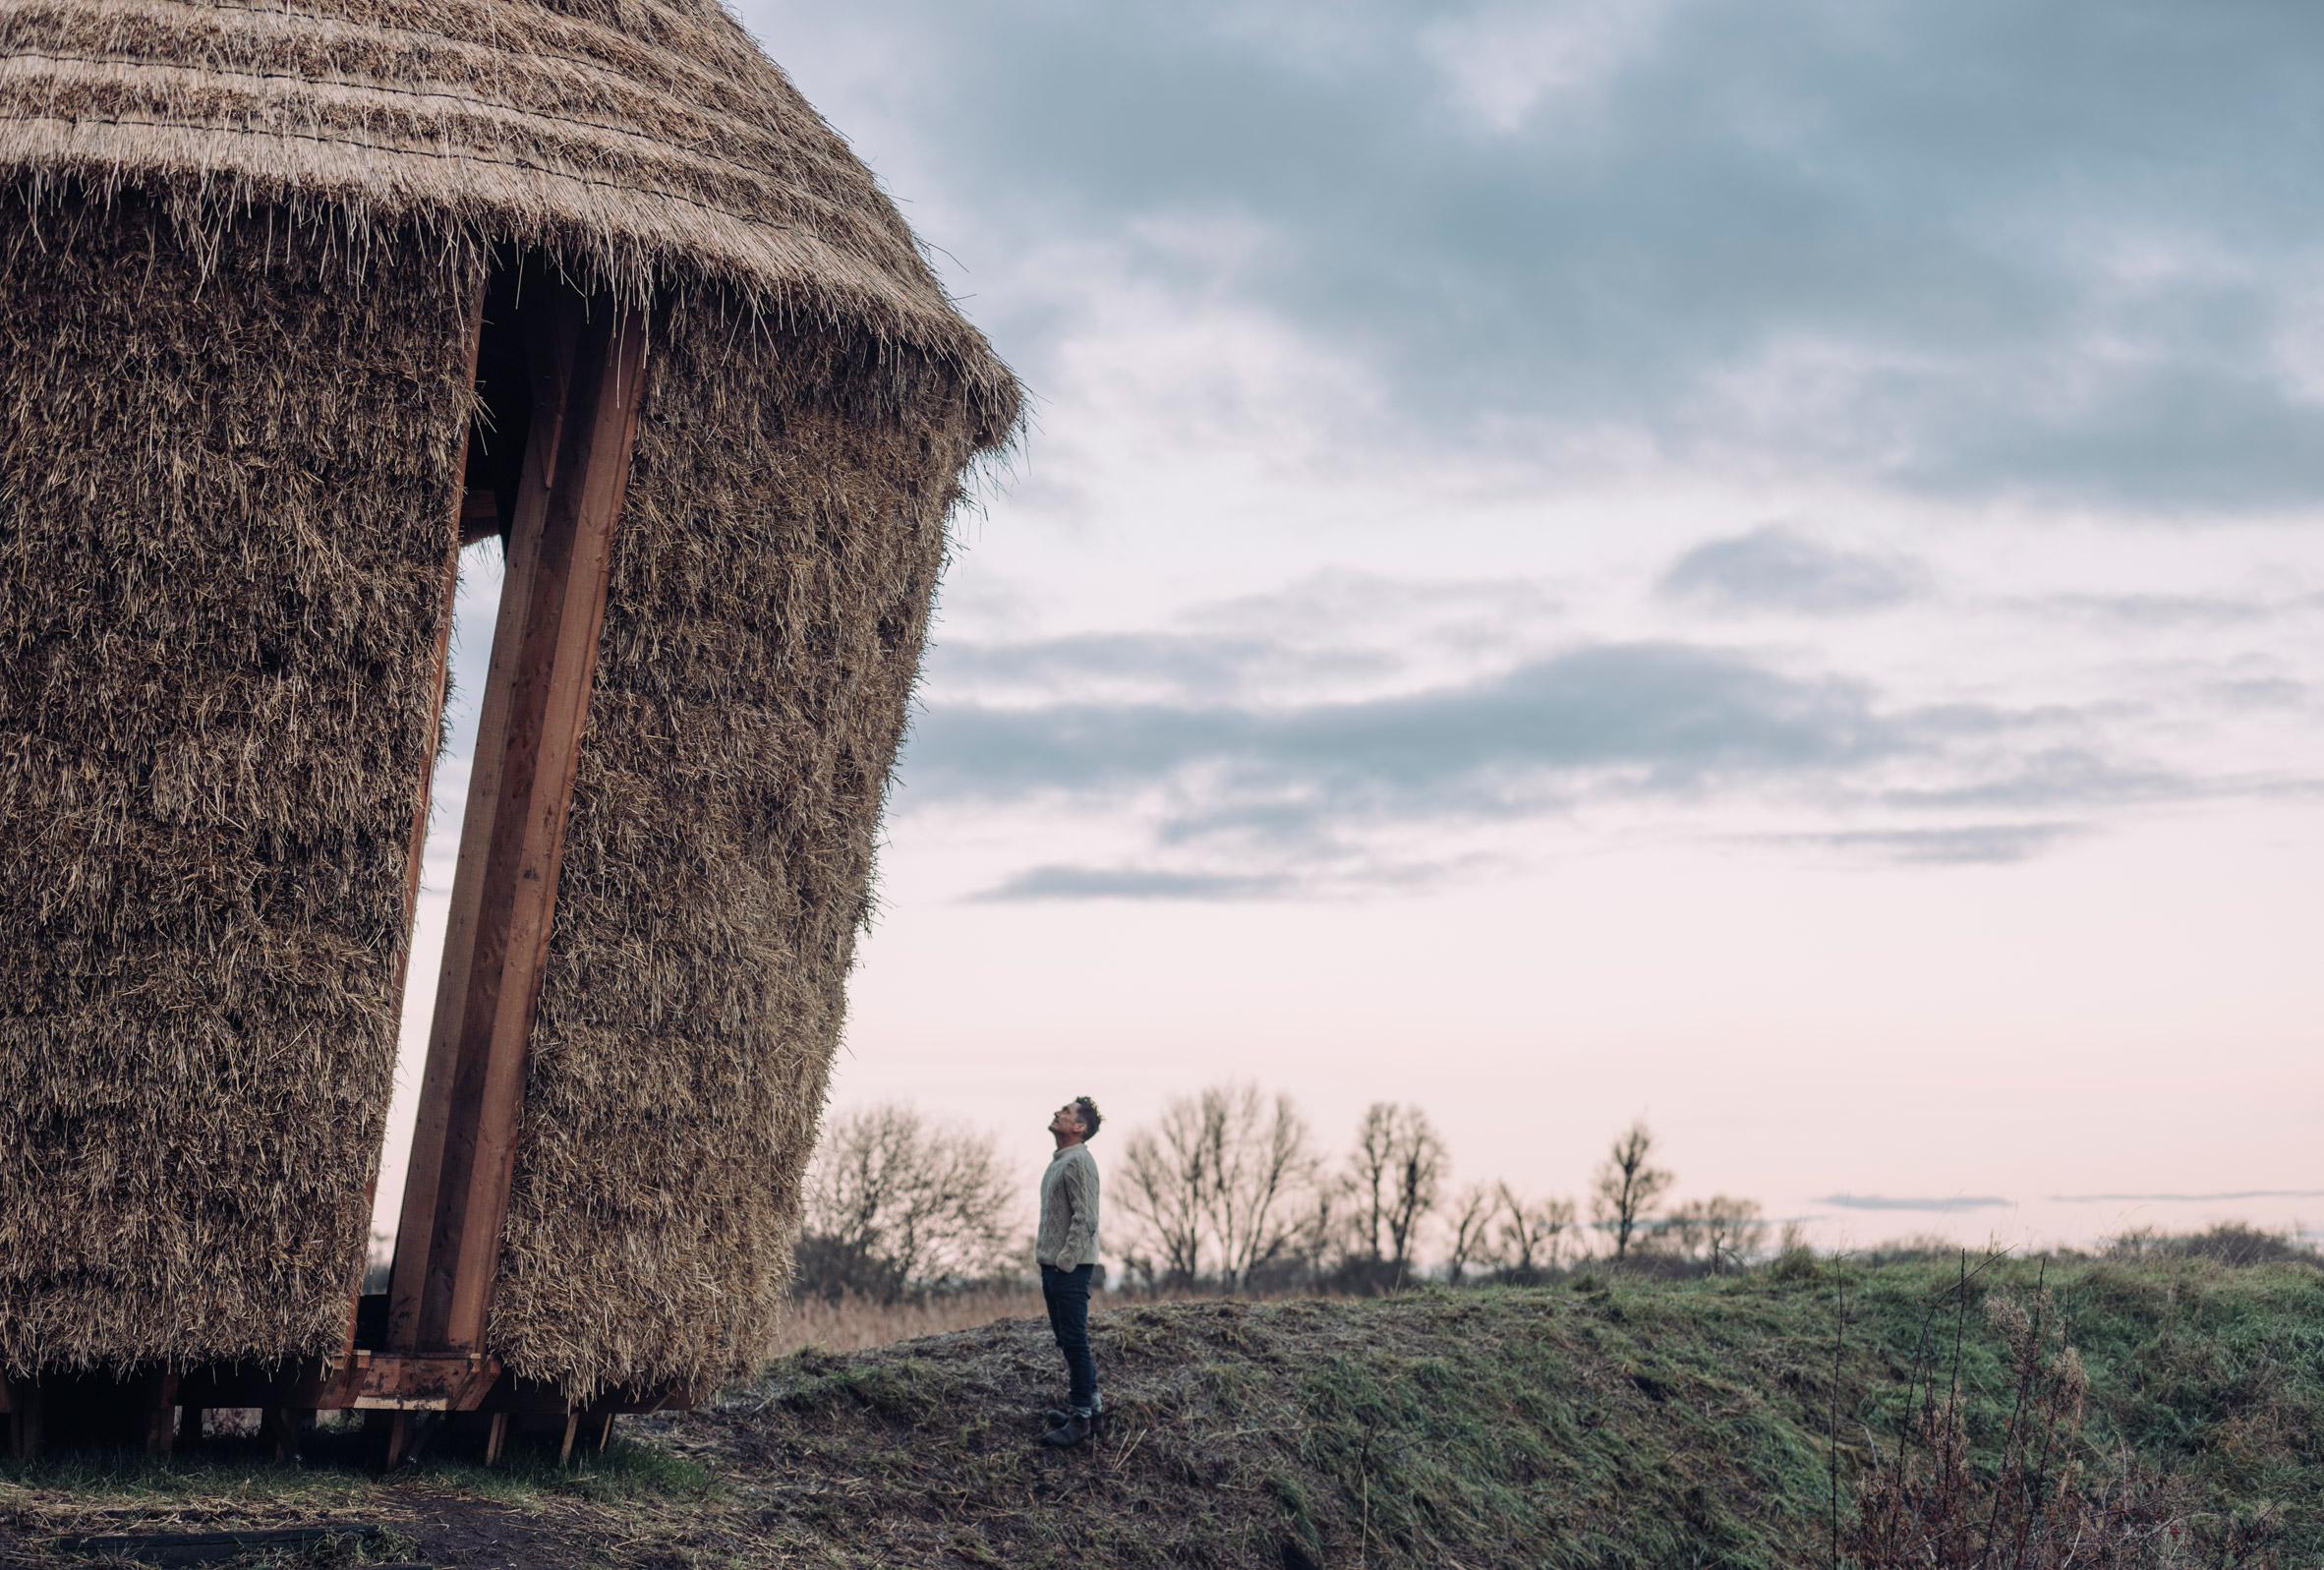 Mother thatched hut by Studio Morison